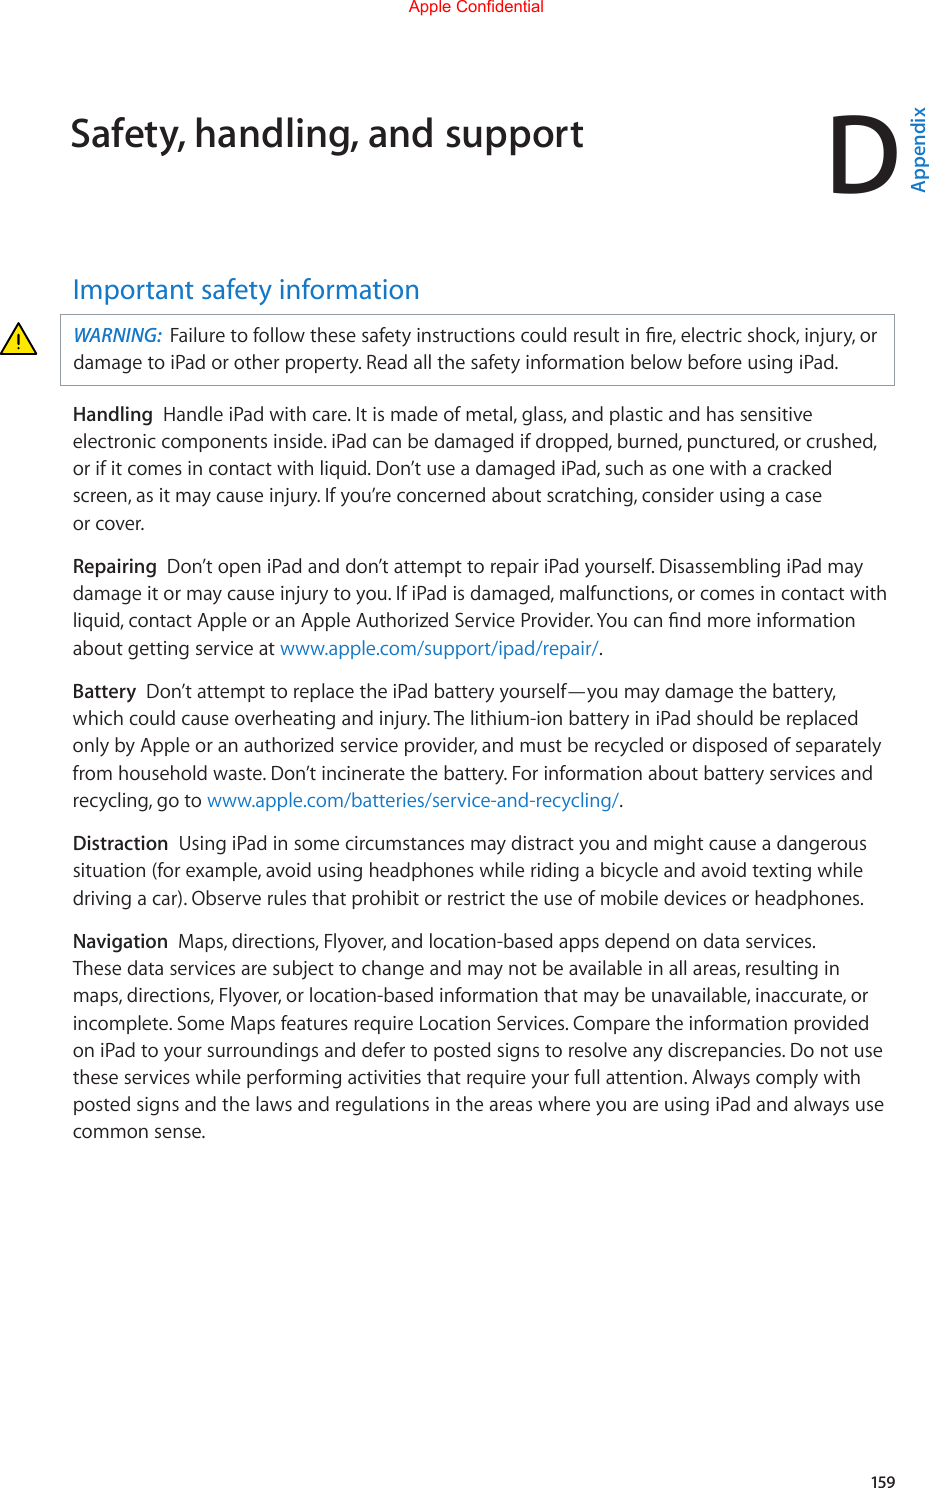 D159Important safety informationWARNING:  Failuretofollowthesesafetyinstructionscouldresultinre,electricshock,injury,ordamage to iPad or other property. Read all the safety information below before using iPad.Handling  Handle iPad with care. It is made of metal, glass, and plastic and has sensitive electronic components inside. iPad can be damaged if dropped, burned, punctured, or crushed, or if it comes in contact with liquid. Don’t use a damaged iPad, such as one with a cracked screen,asitmaycauseinjury.Ifyou’reconcernedaboutscratching,considerusingacaseor cover.Repairing  Don’t open iPad and don’t attempt to repair iPad yourself. Disassembling iPad may damageitormaycauseinjurytoyou.IfiPadisdamaged,malfunctions,orcomesincontactwithliquid,contactAppleoranAppleAuthorizedServiceProvider.Youcanndmoreinformationabout getting service at www.apple.com/support/ipad/repair/.Battery  Don’t attempt to replace the iPad battery yourself—you may damage the battery, whichcouldcauseoverheatingandinjury.Thelithium-ionbatteryiniPadshouldbereplacedonly by Apple or an authorized service provider, and must be recycled or disposed of separately from household waste. Don’t incinerate the battery. For information about battery services and recycling, go to www.apple.com/batteries/service-and-recycling/.Distraction  Using iPad in some circumstances may distract you and might cause a dangerous situation (for example, avoid using headphones while riding a bicycle and avoid texting while driving a car). Observe rules that prohibit or restrict the use of mobile devices or headphones.Navigation  Maps, directions, Flyover, and location-based apps depend on data services. Thesedataservicesaresubjecttochangeandmaynotbeavailableinallareas,resultinginmaps, directions, Flyover, or location-based information that may be unavailable, inaccurate, or incomplete. Some Maps features require Location Services. Compare the information provided on iPad to your surroundings and defer to posted signs to resolve any discrepancies. Do not use these services while performing activities that require your full attention. Always comply with posted signs and the laws and regulations in the areas where you are using iPad and always use common sense.Safety, handling, and supportAppendixApple Confidential